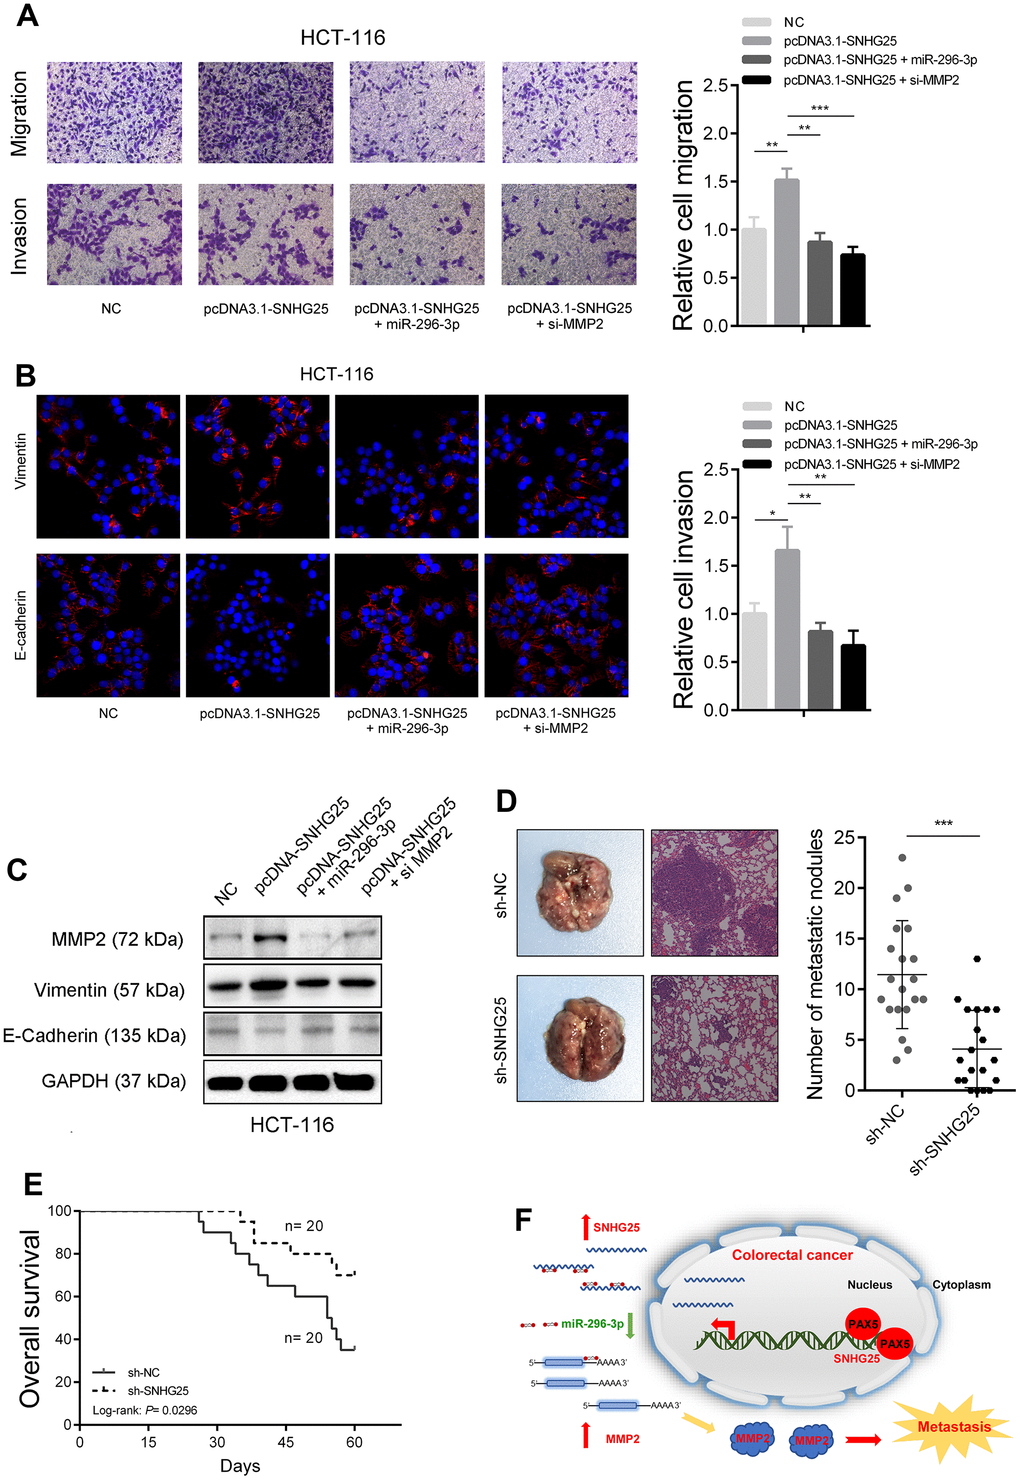 SNHG25 promotes CRC metastasis by regulating MMP2 expression. (A) The migration and invasion abilities of HCT-116 cells were evaluated by transwell assays after indicated treatments. (B) Vimentin and E-Cadherin expression was detected by immunofluorescence in HCT-116 cells with indicated treatments. (C) MMP2, Vimentin and E-cadherin expression was detected by western blot in HCT-116 cells with indicated treatments. (D) Left panel, representative images of lungs from mice after tail vein injections with stably transfected sh-SNHG25 and sh-NC HCT-116 cells. Right panel, quantitative analysis of metastasis foci in corresponding groups. (E) Survival analysis of mice after tail vein injections with stably transfected sh-SNHG25 and sh-NC HCT-116 cells. (F) Schematic of the proposed mechanism of SNHG25 in CRC. *P 